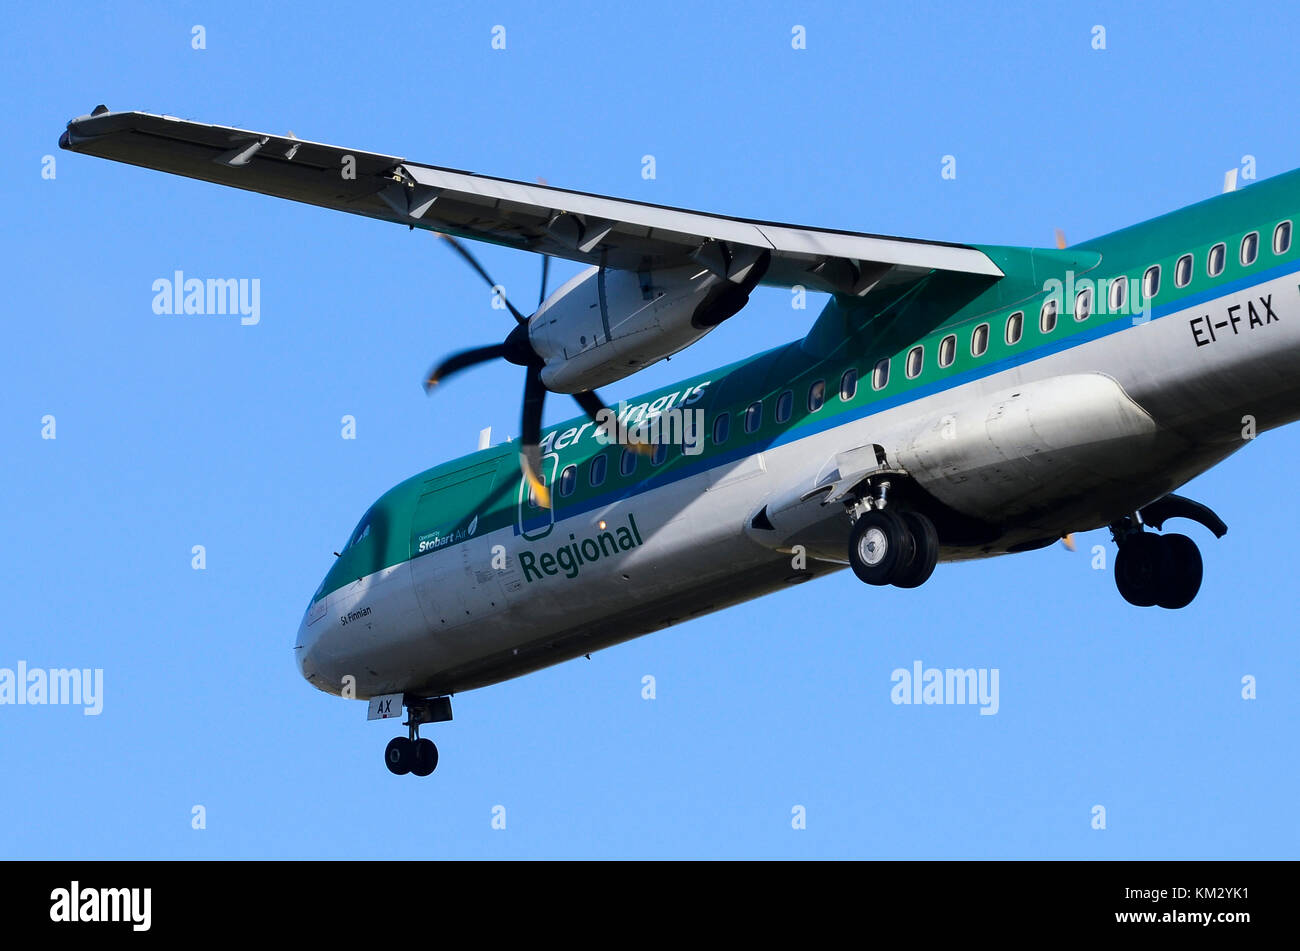 ATR 72 operated by Stobart Air on behalf of Aer Lingus Regional, Birmingham Airport, UK. ATR 72-600 EI-FAX St. Finian is seen on approach for landing. Stock Photo